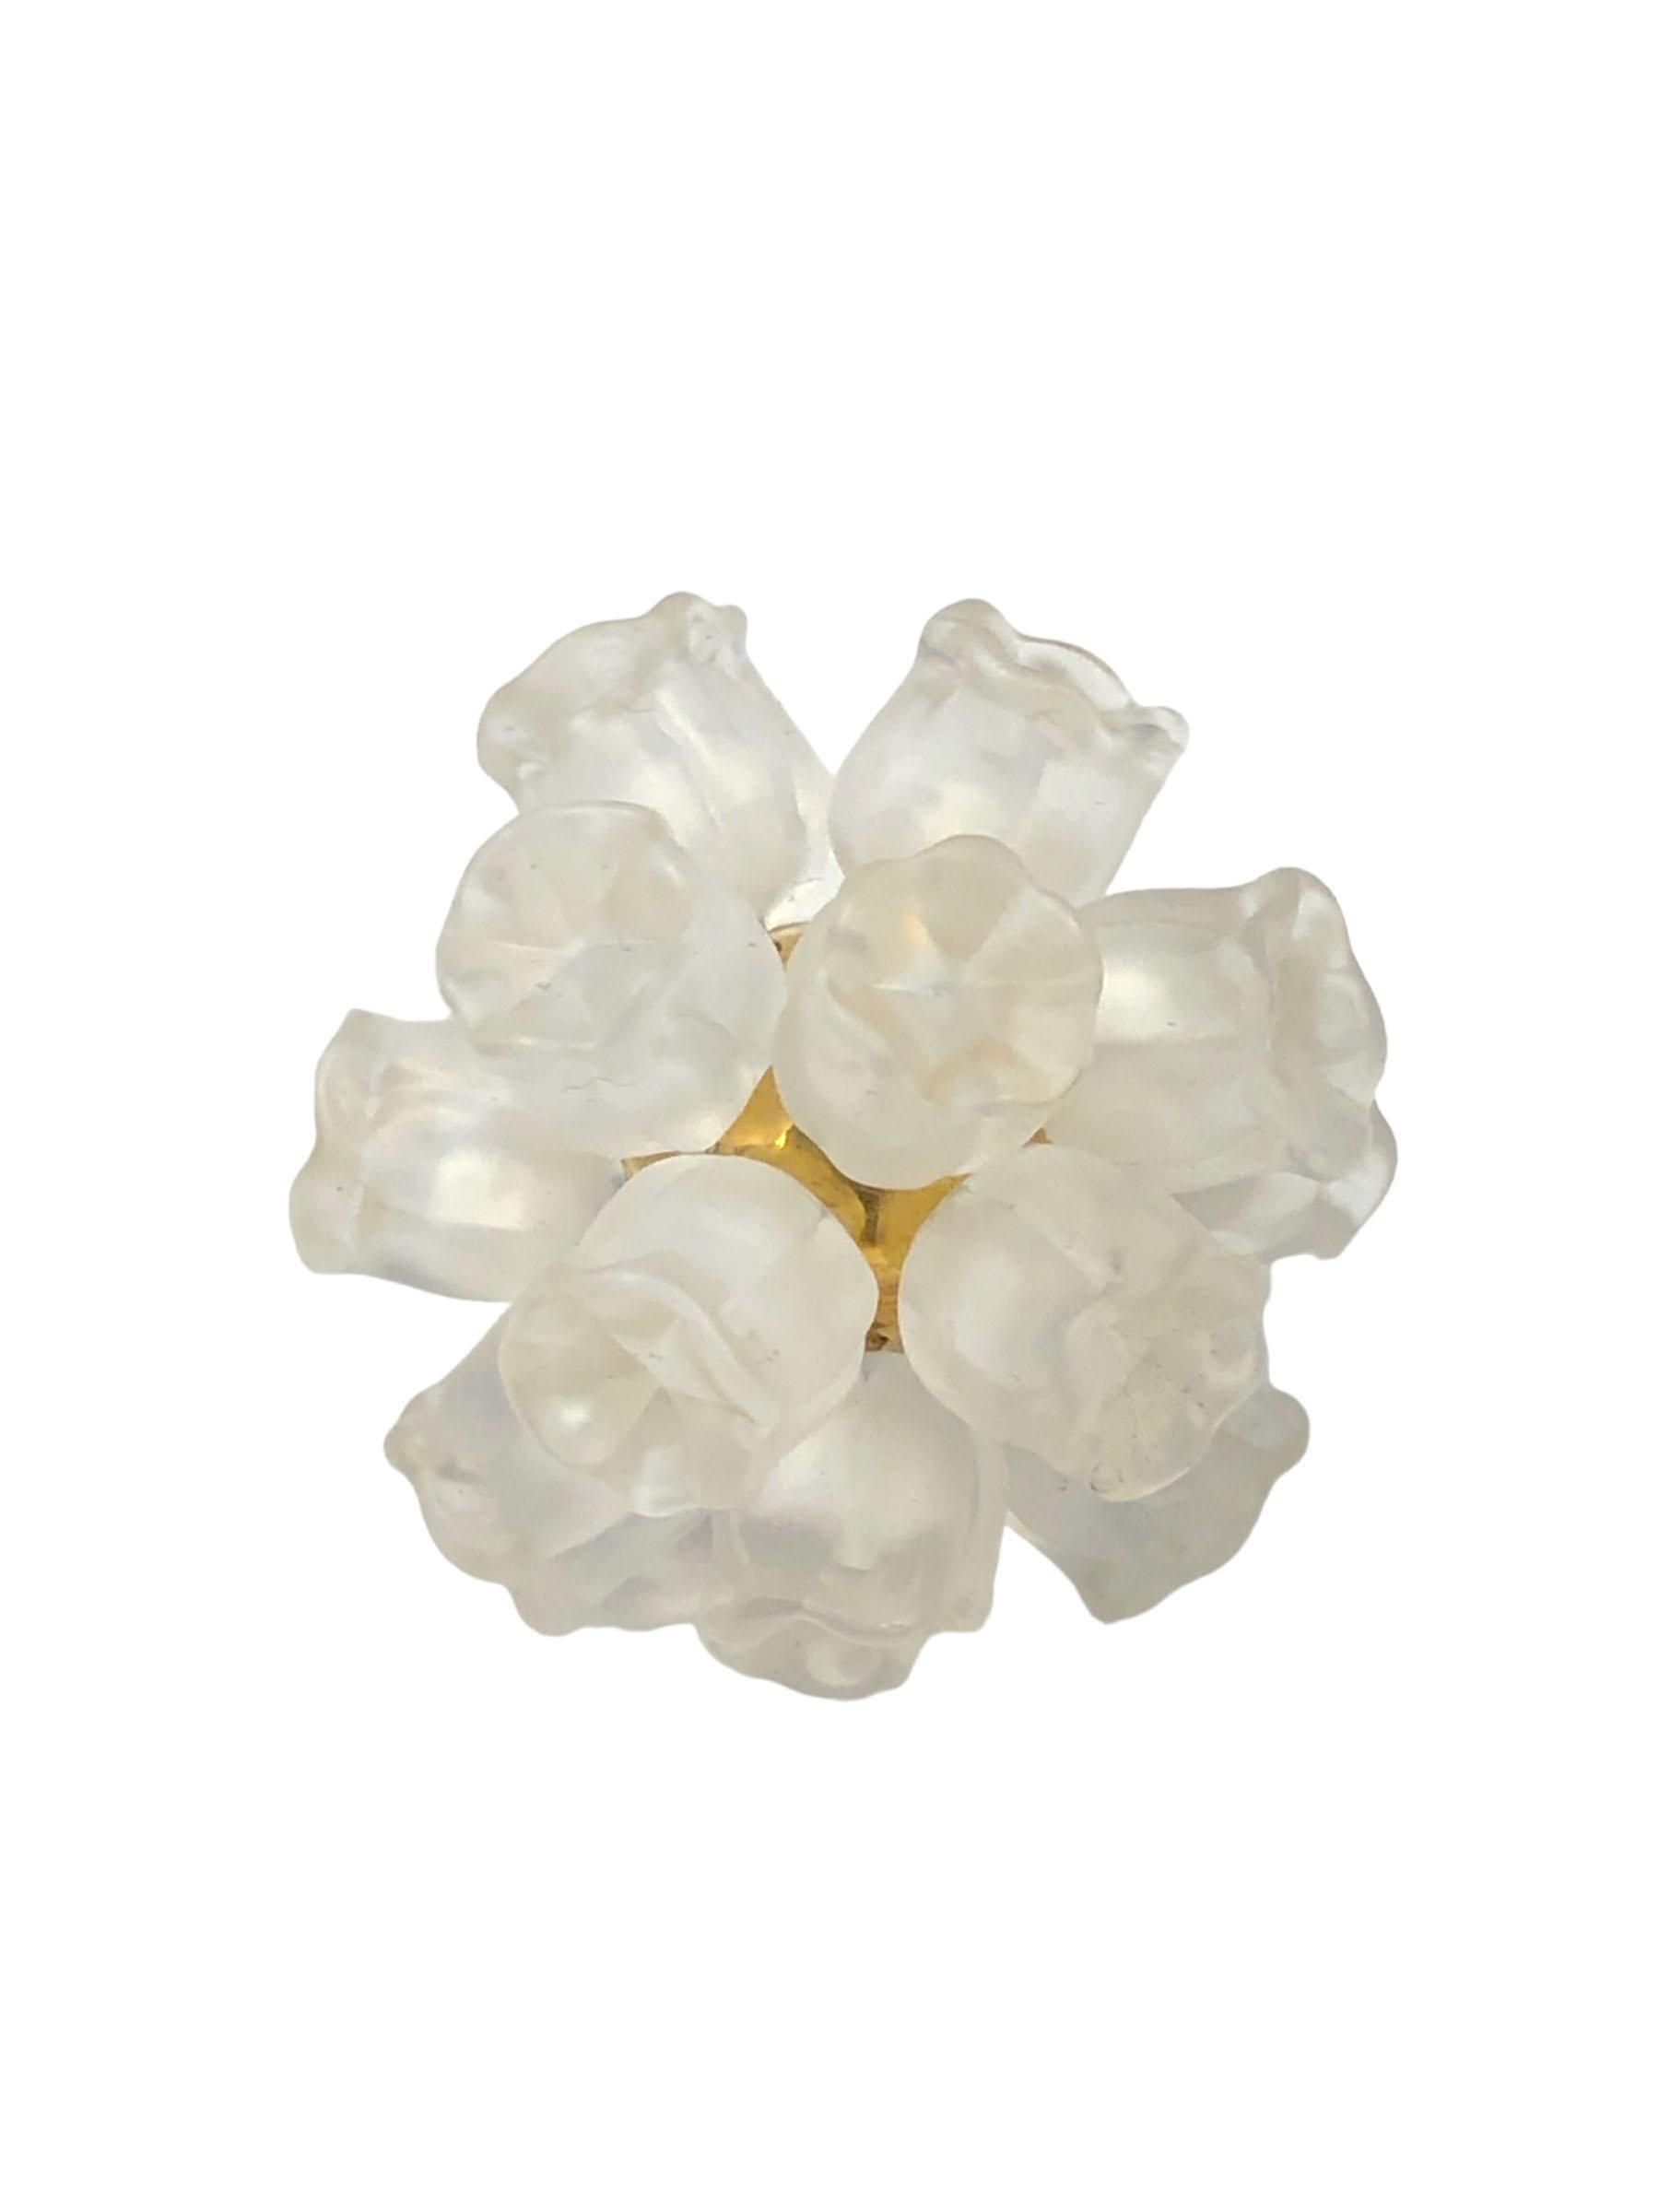 Circa 1990s Lalique Lily of the Valley Cluster Ring, size 5 Gold Gilt metal shank set with 11 Frosted Crystal Lily Flowers, this is near unworn and comes in the original presentation box with paperwork.